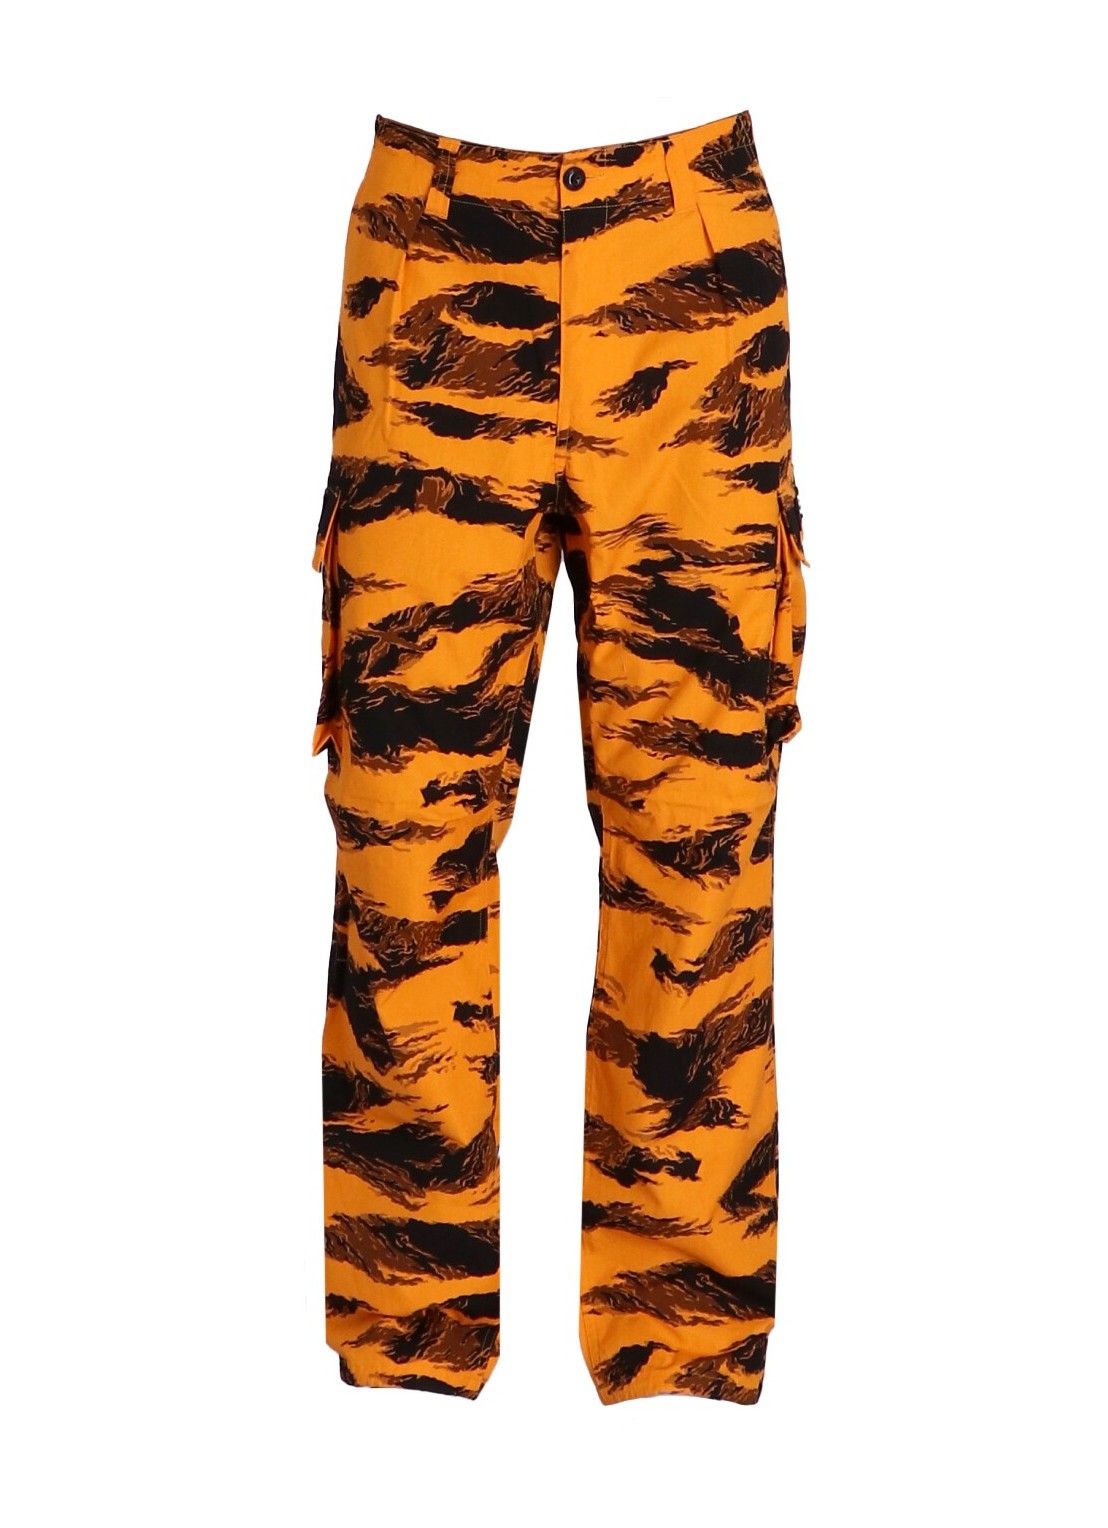 TIGER CAMO RELAXED FIT MILITARY PANTS M